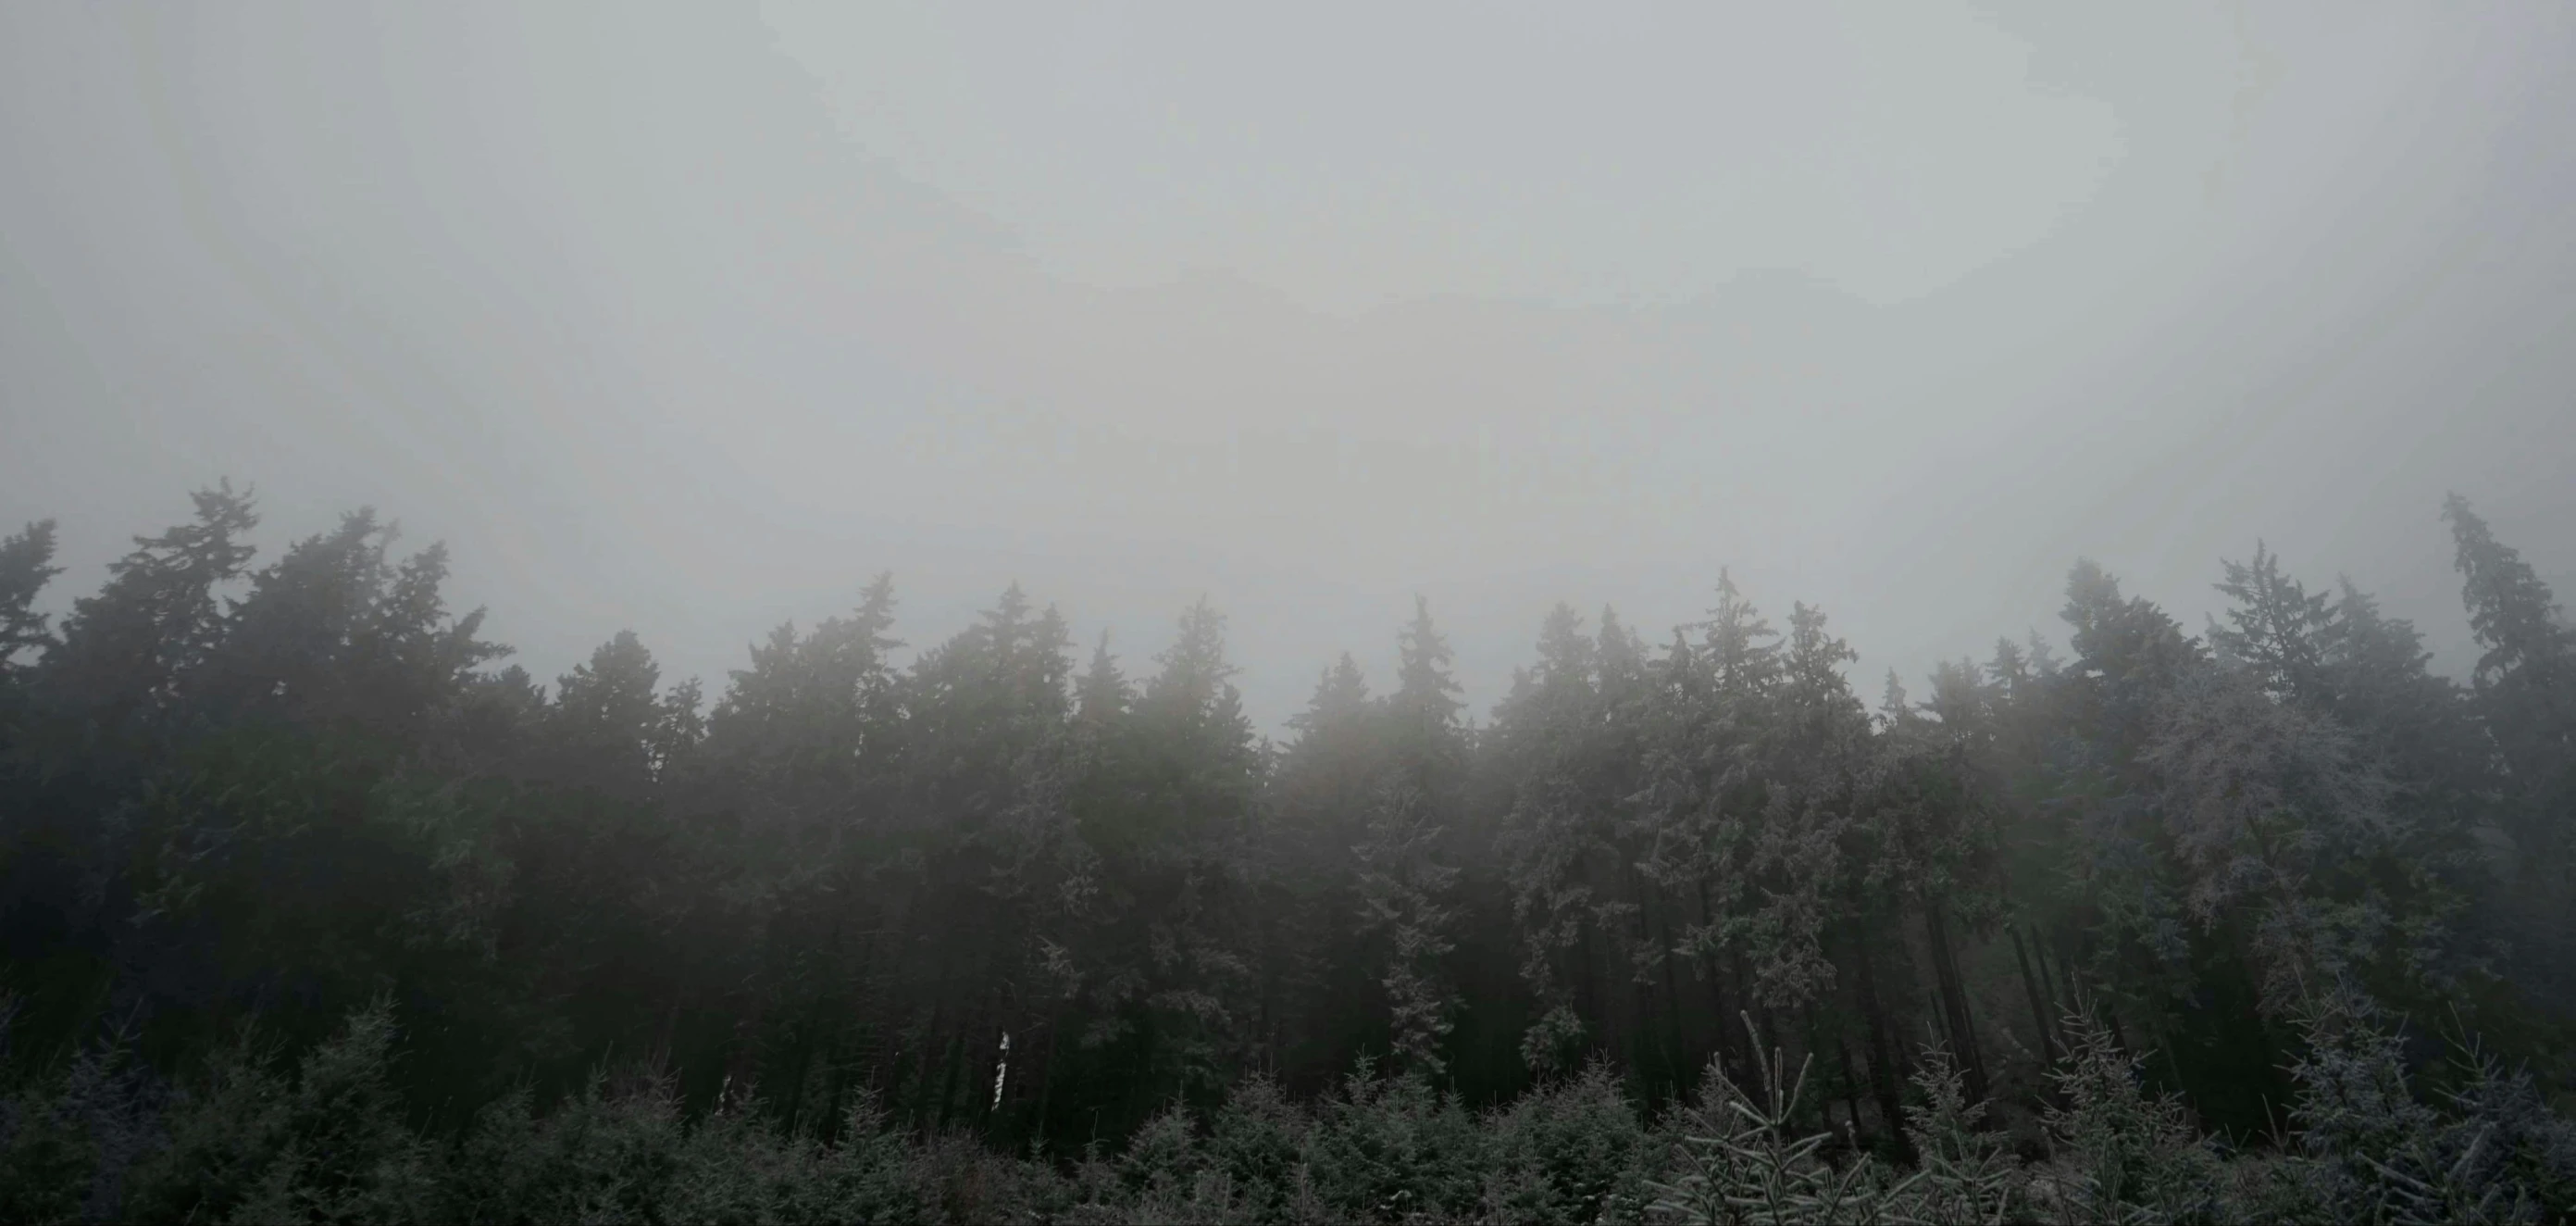 a group of trees that are surrounded by fog